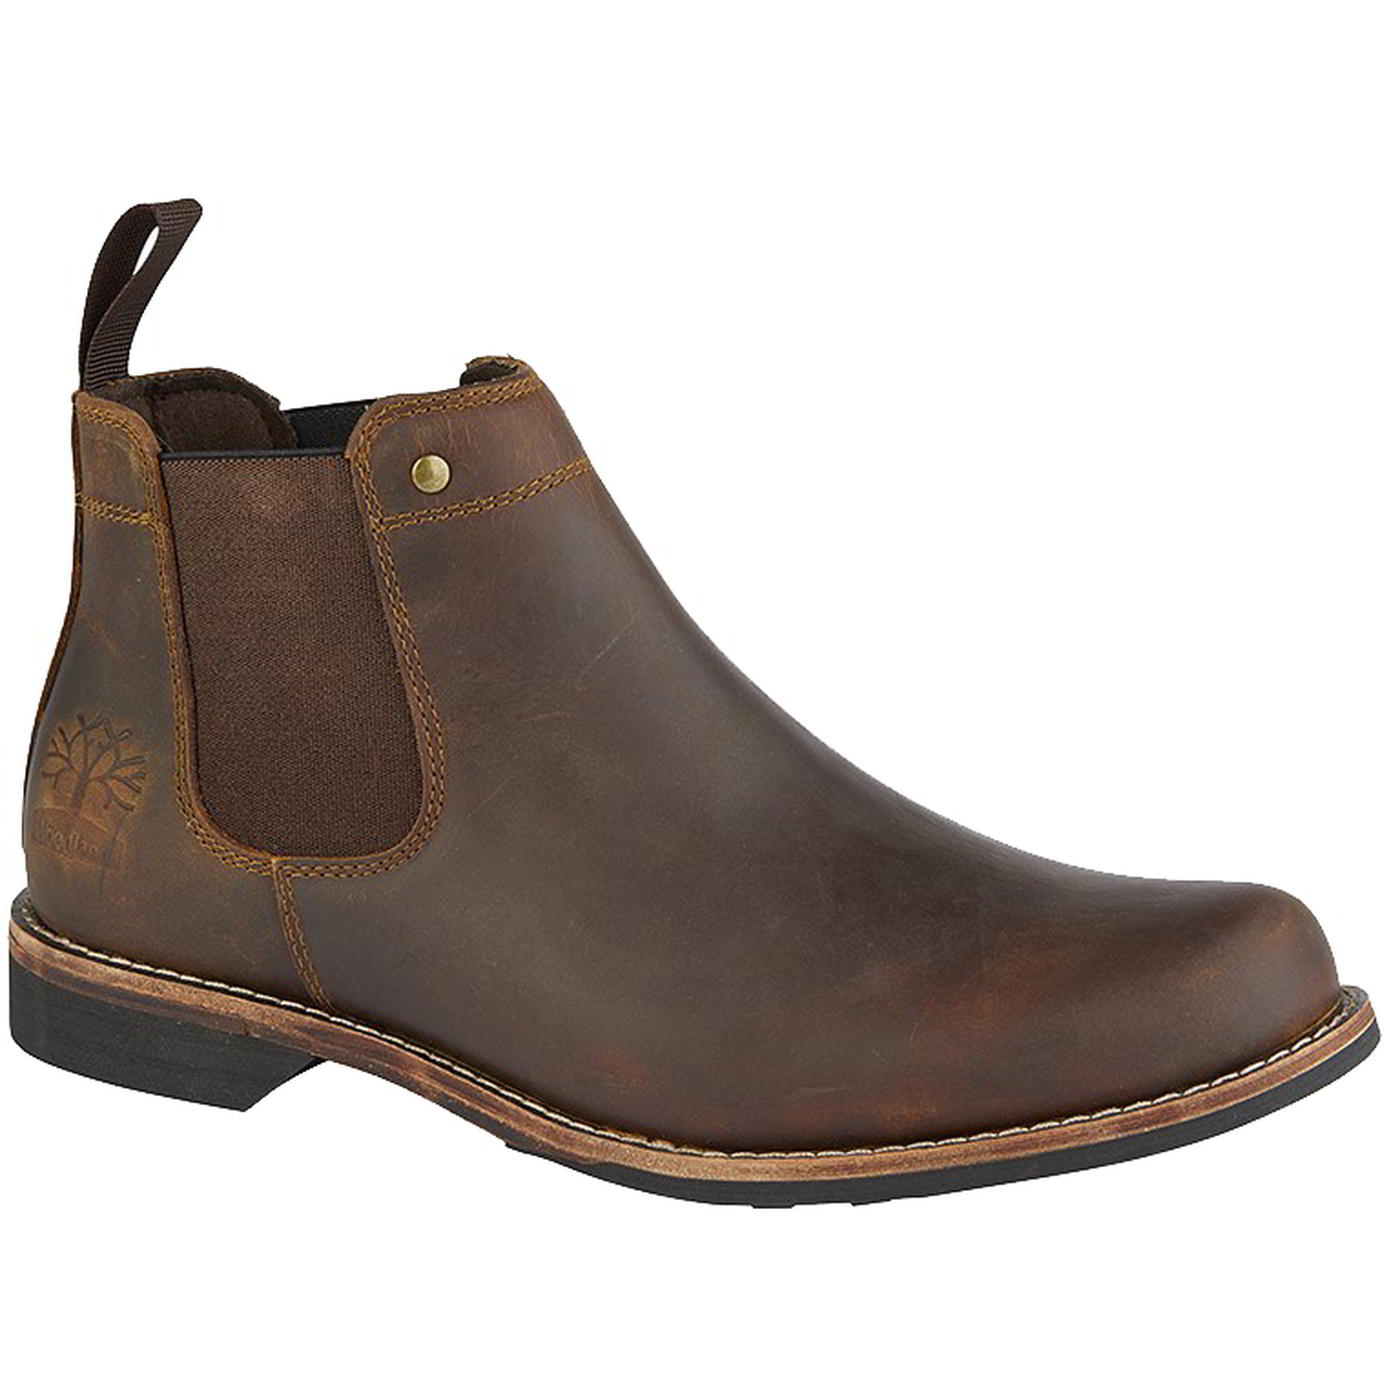 Woodland Men's Leather Chelsea Ankle Boots - UK 7